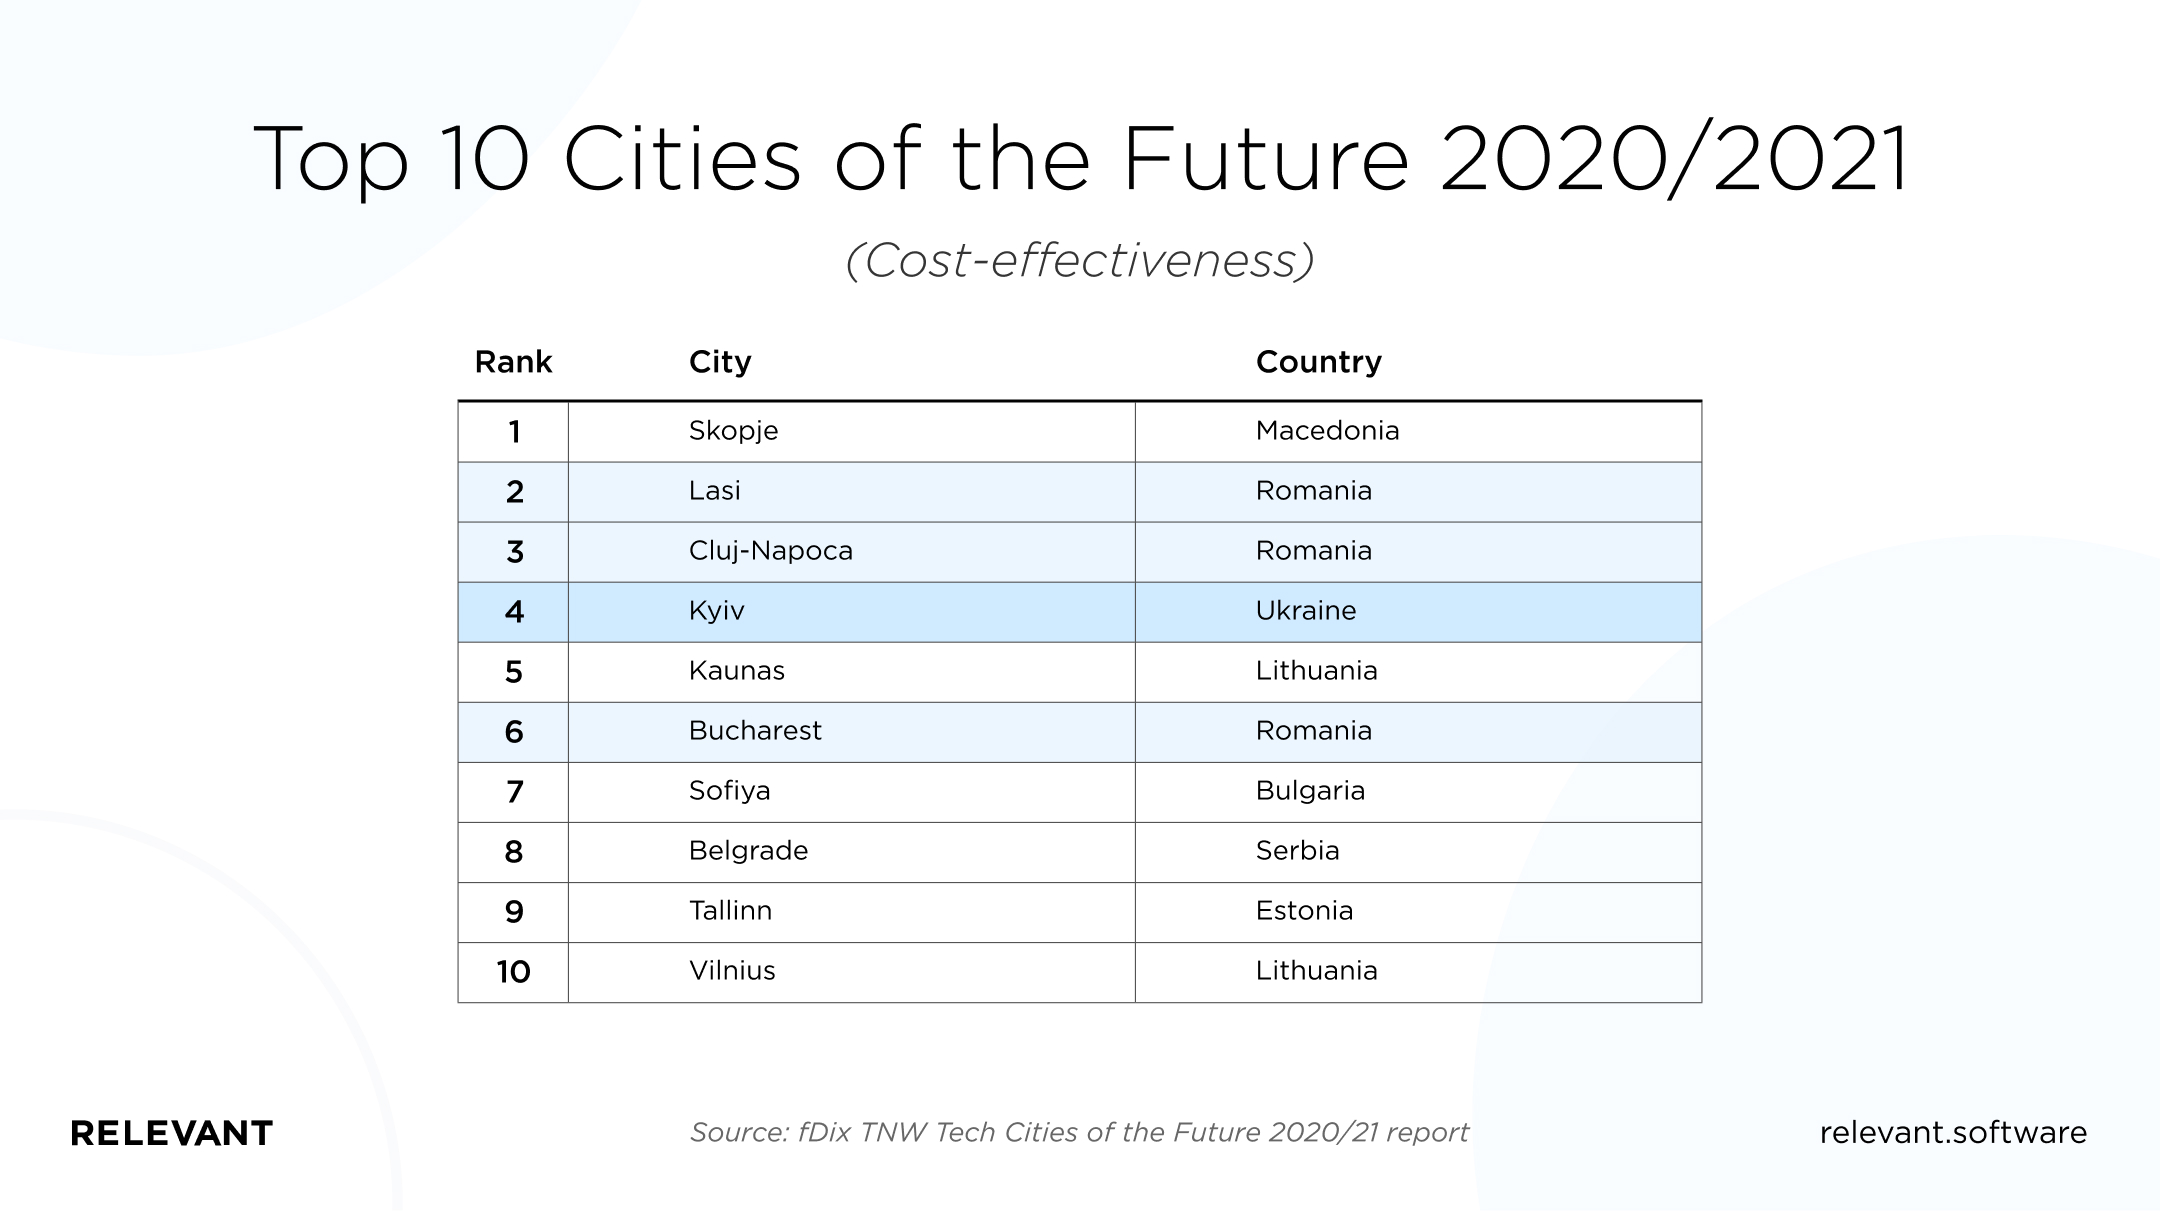 Top 10 Cities of The Future according to cost-effectiveness